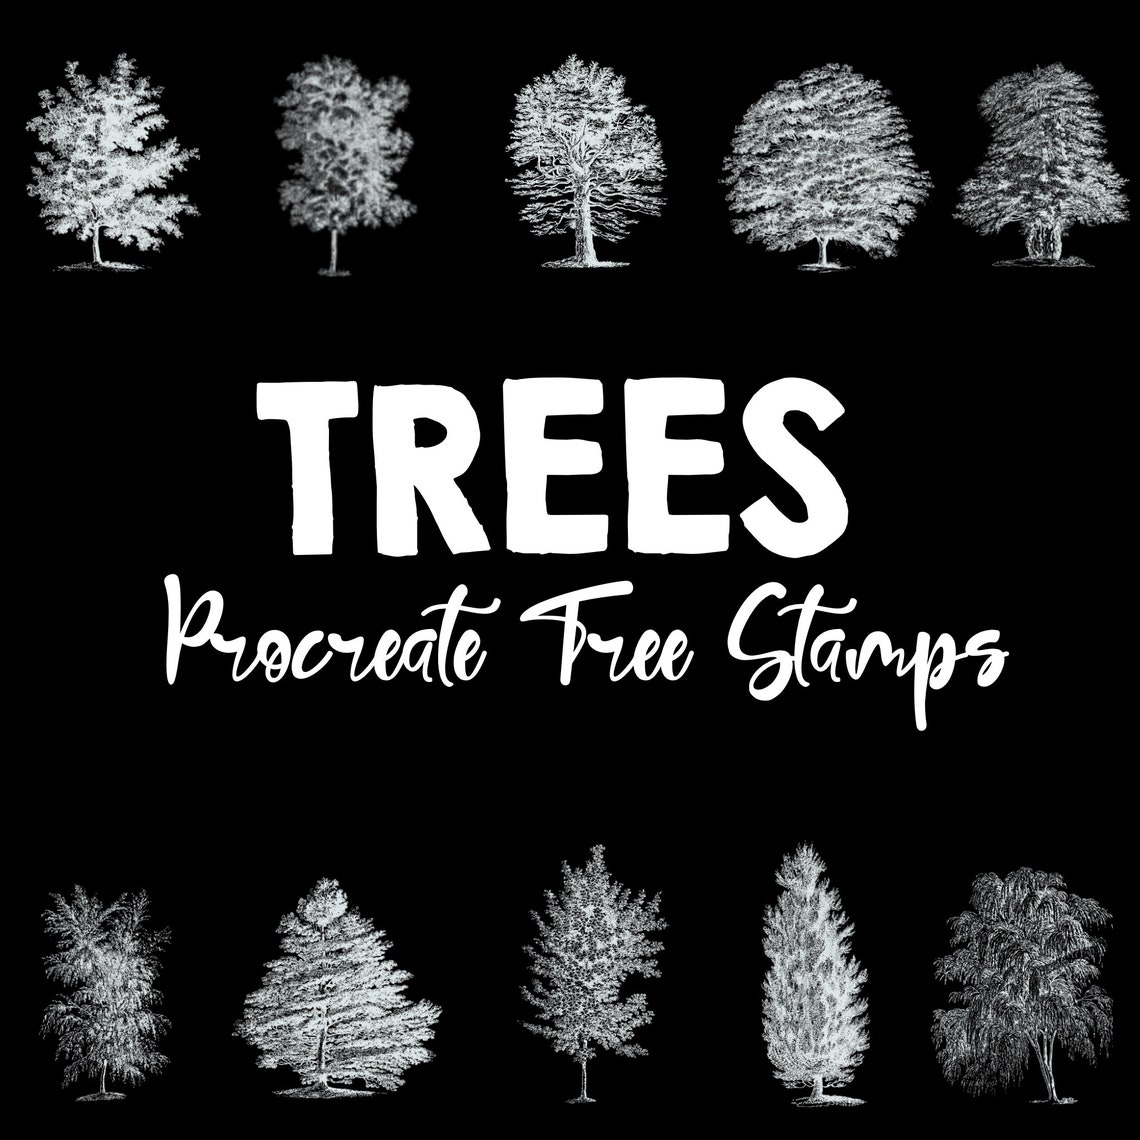 Free tree stamps for procreate final cut pro x lessons free